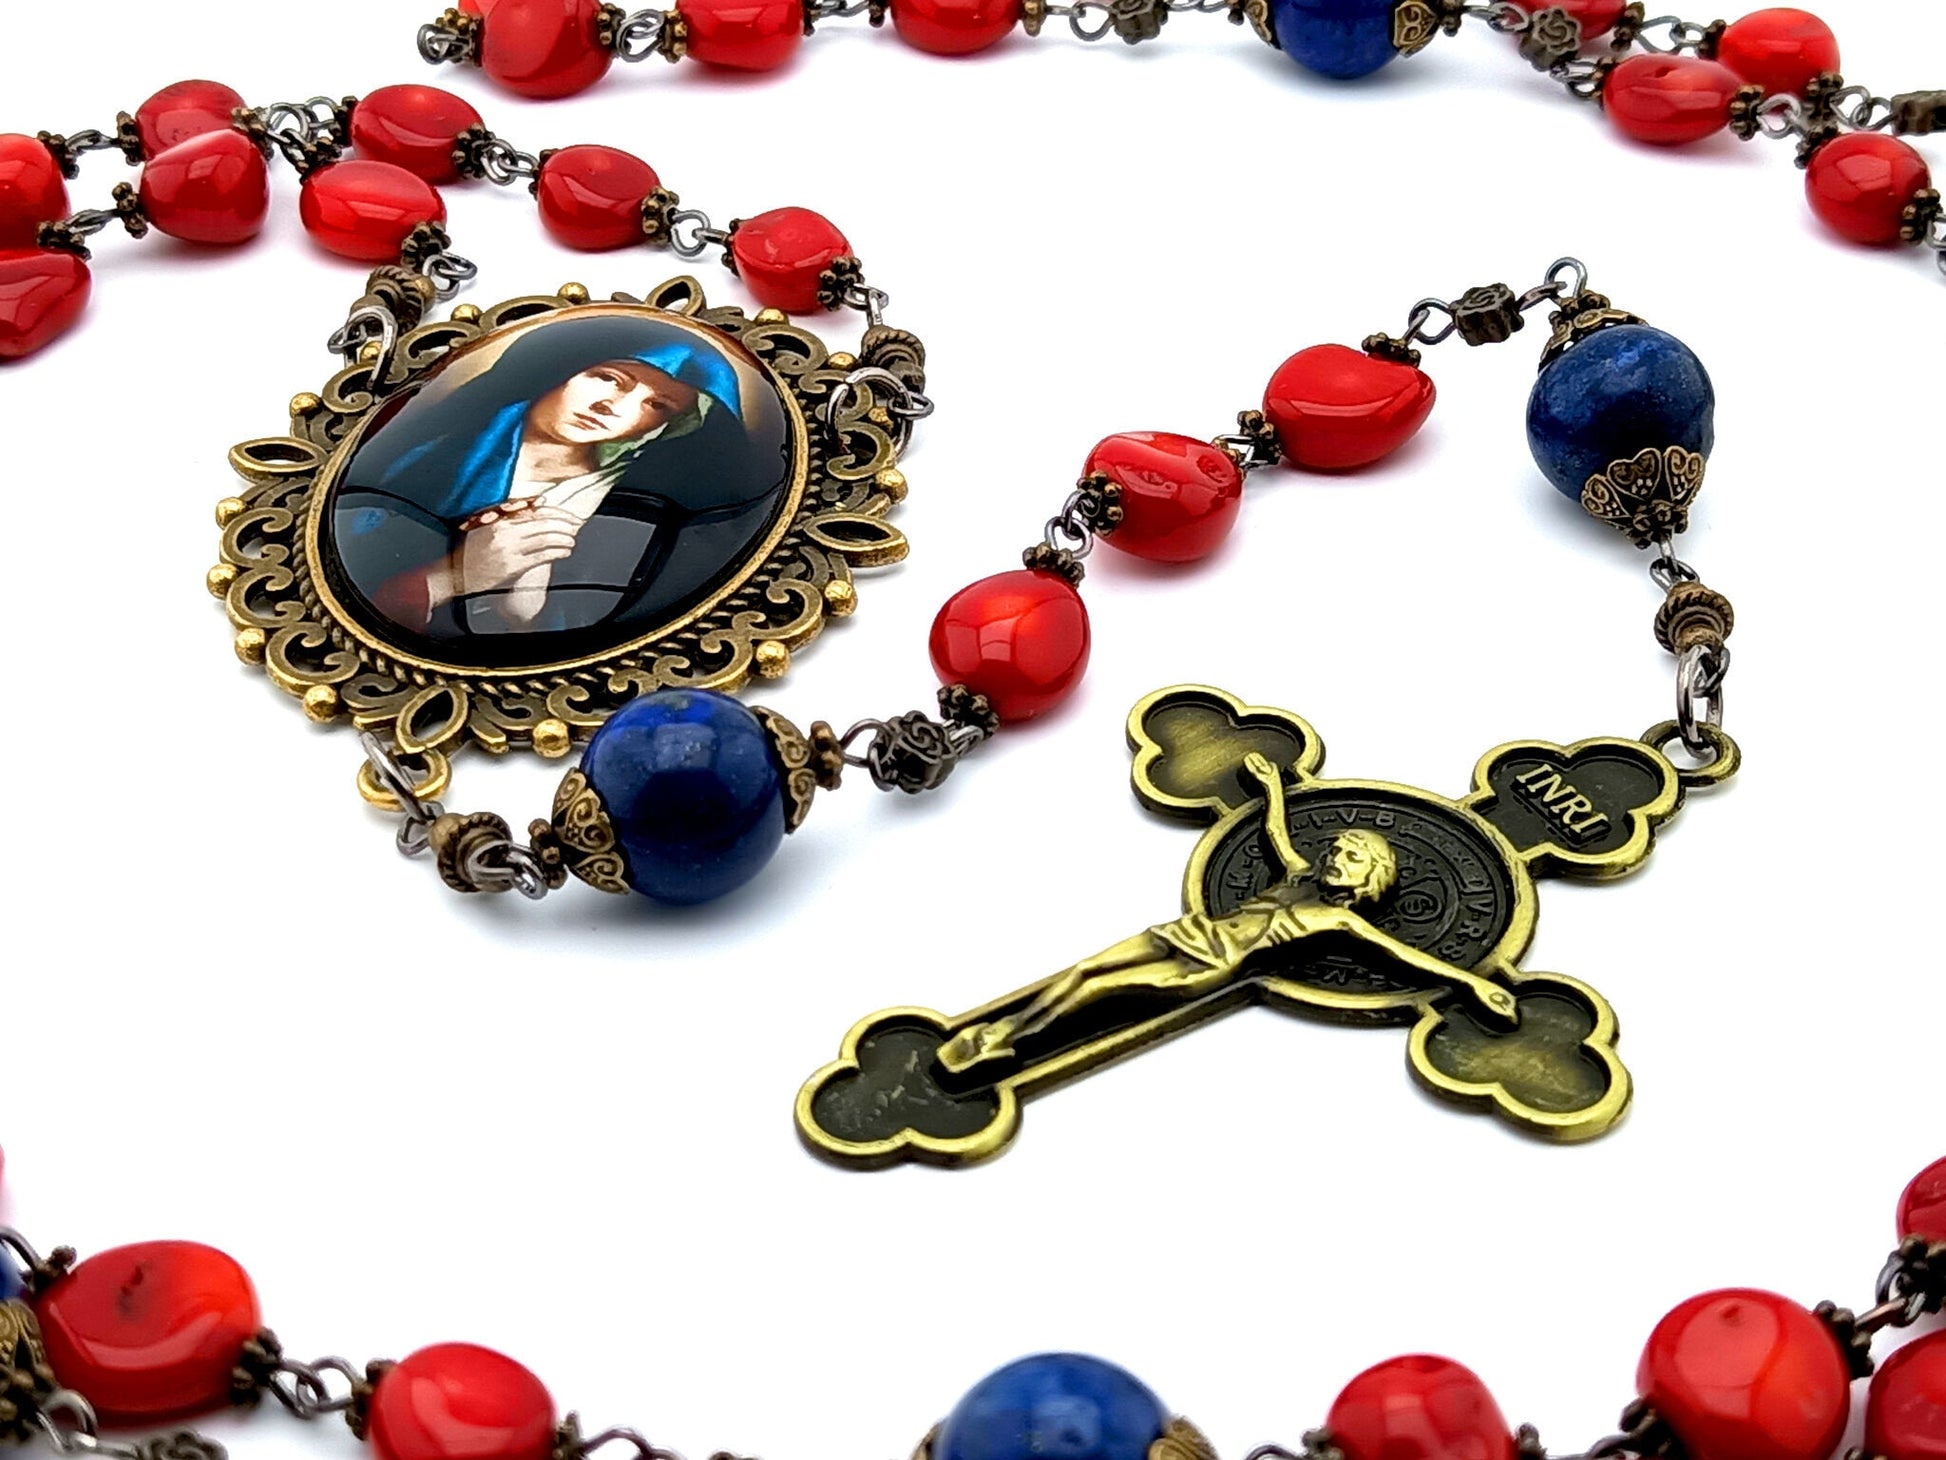 Our Lady of Sorrows unique rosary beads with red gemstone beads, lapis lazuli pater beads, bronze picture centre medal and crucifix.